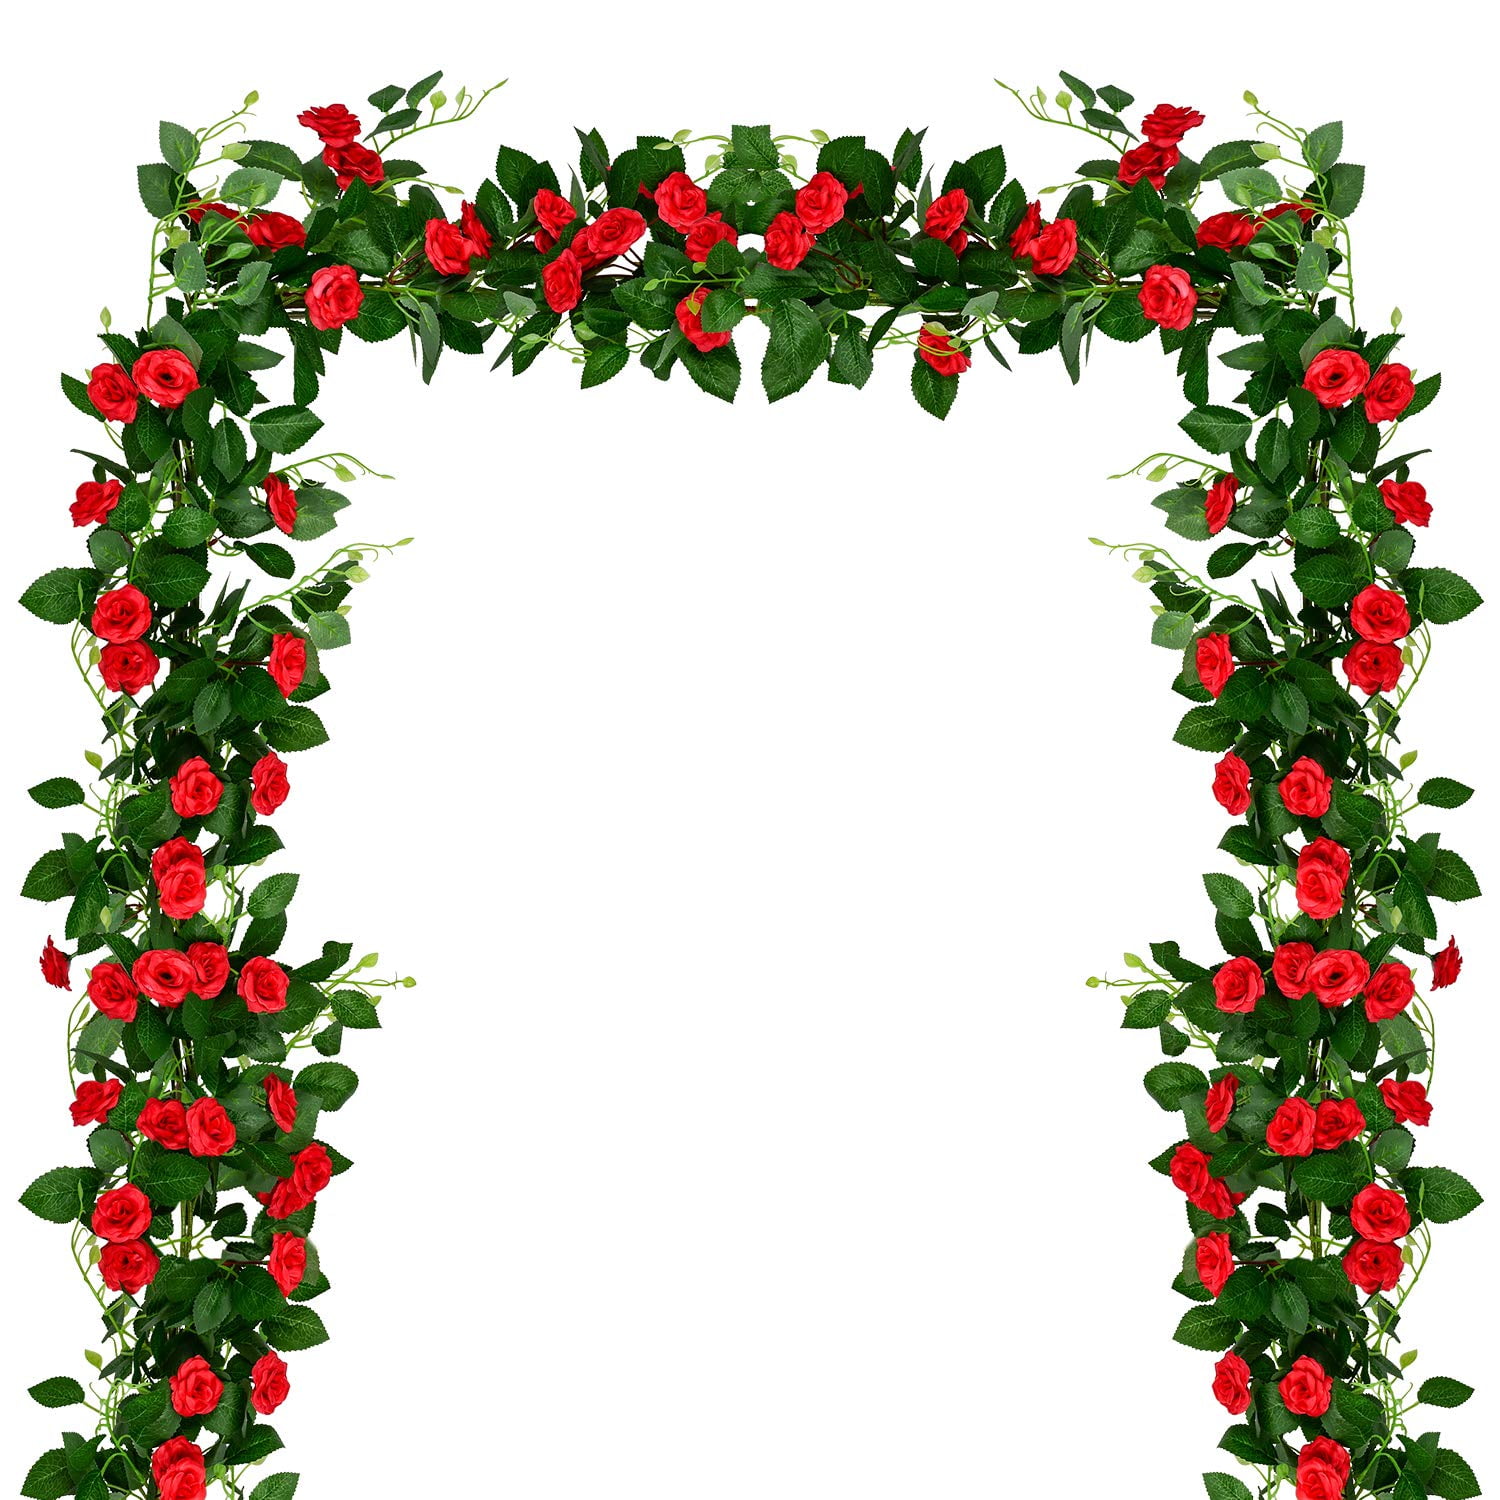 LEFV 8 Feet Rose Vines Artificial Garland with Green Leaves,Blue